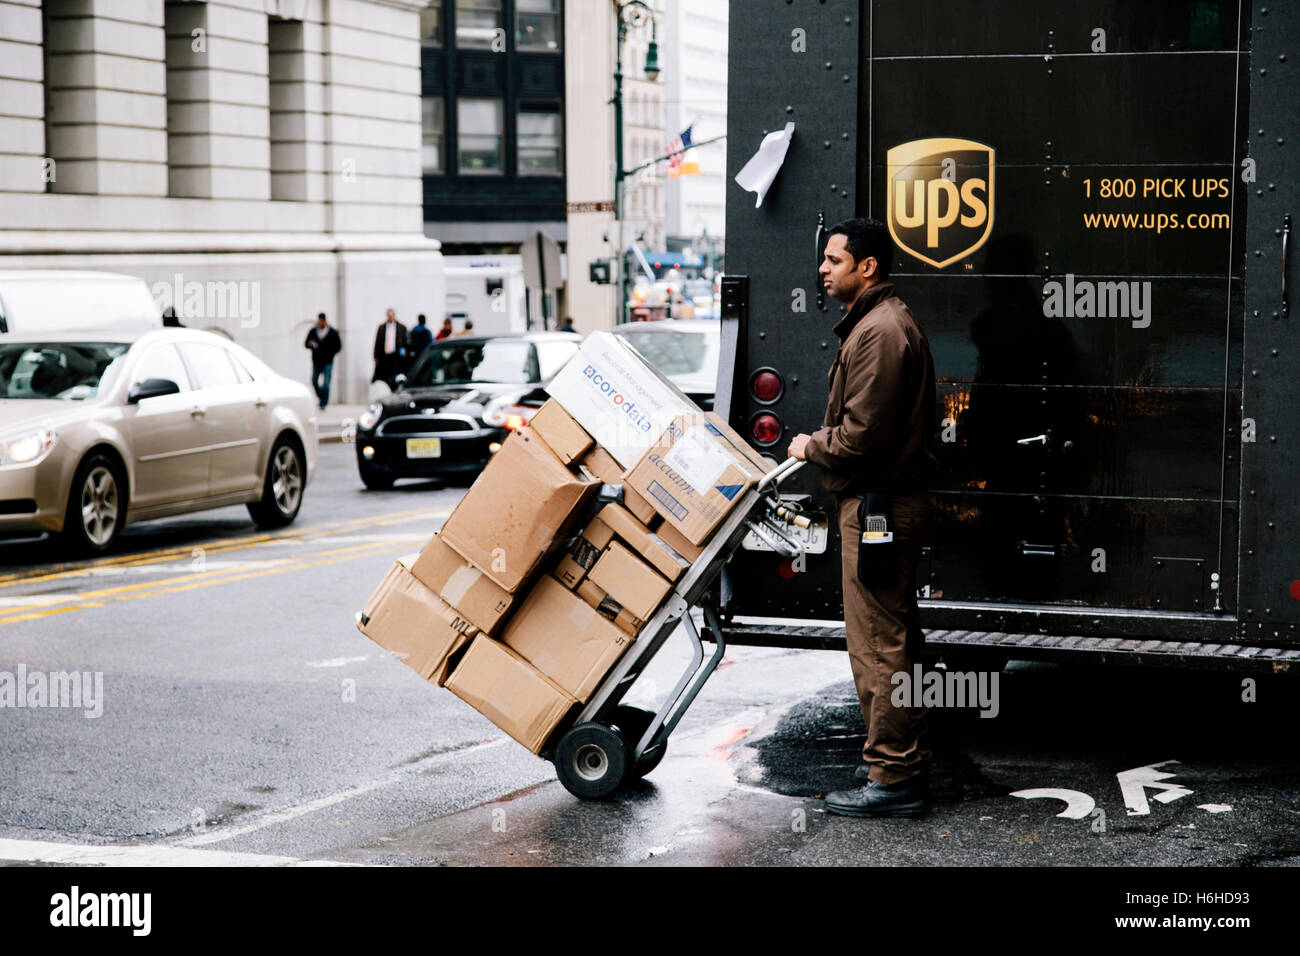 New-York - NOV 13: UPS delivery worker waiting by his truck to cross the street holding a cart full with packages in New-York, U Stock Photo